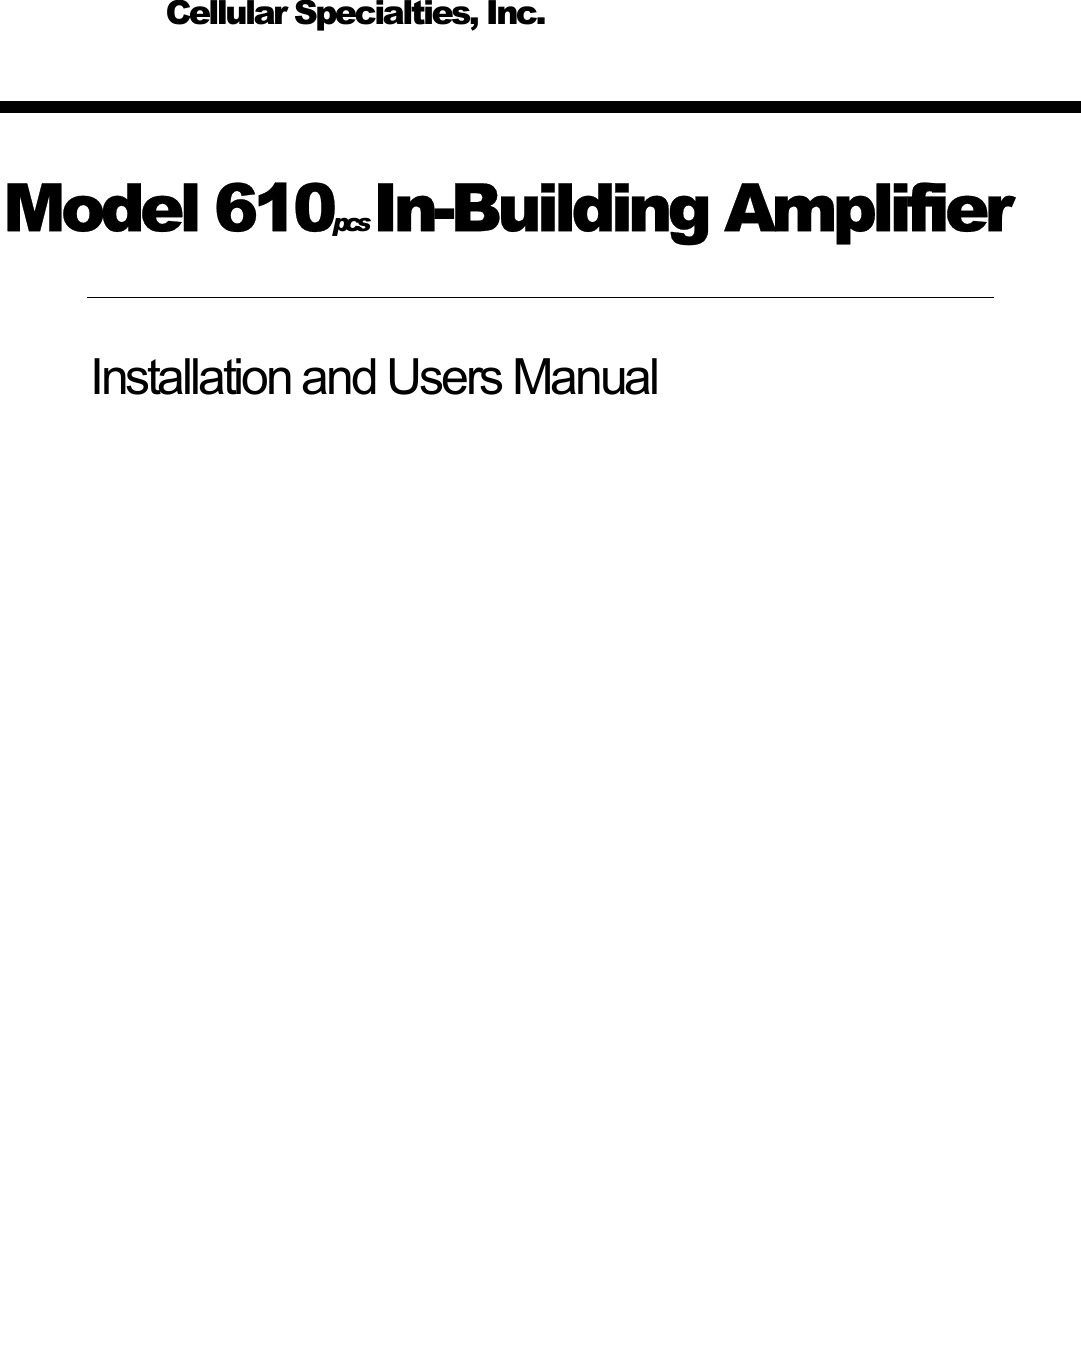     Model 610pcs  In-Building Amplifier Installation and Users Manual       Cellular Specialties, Inc.  